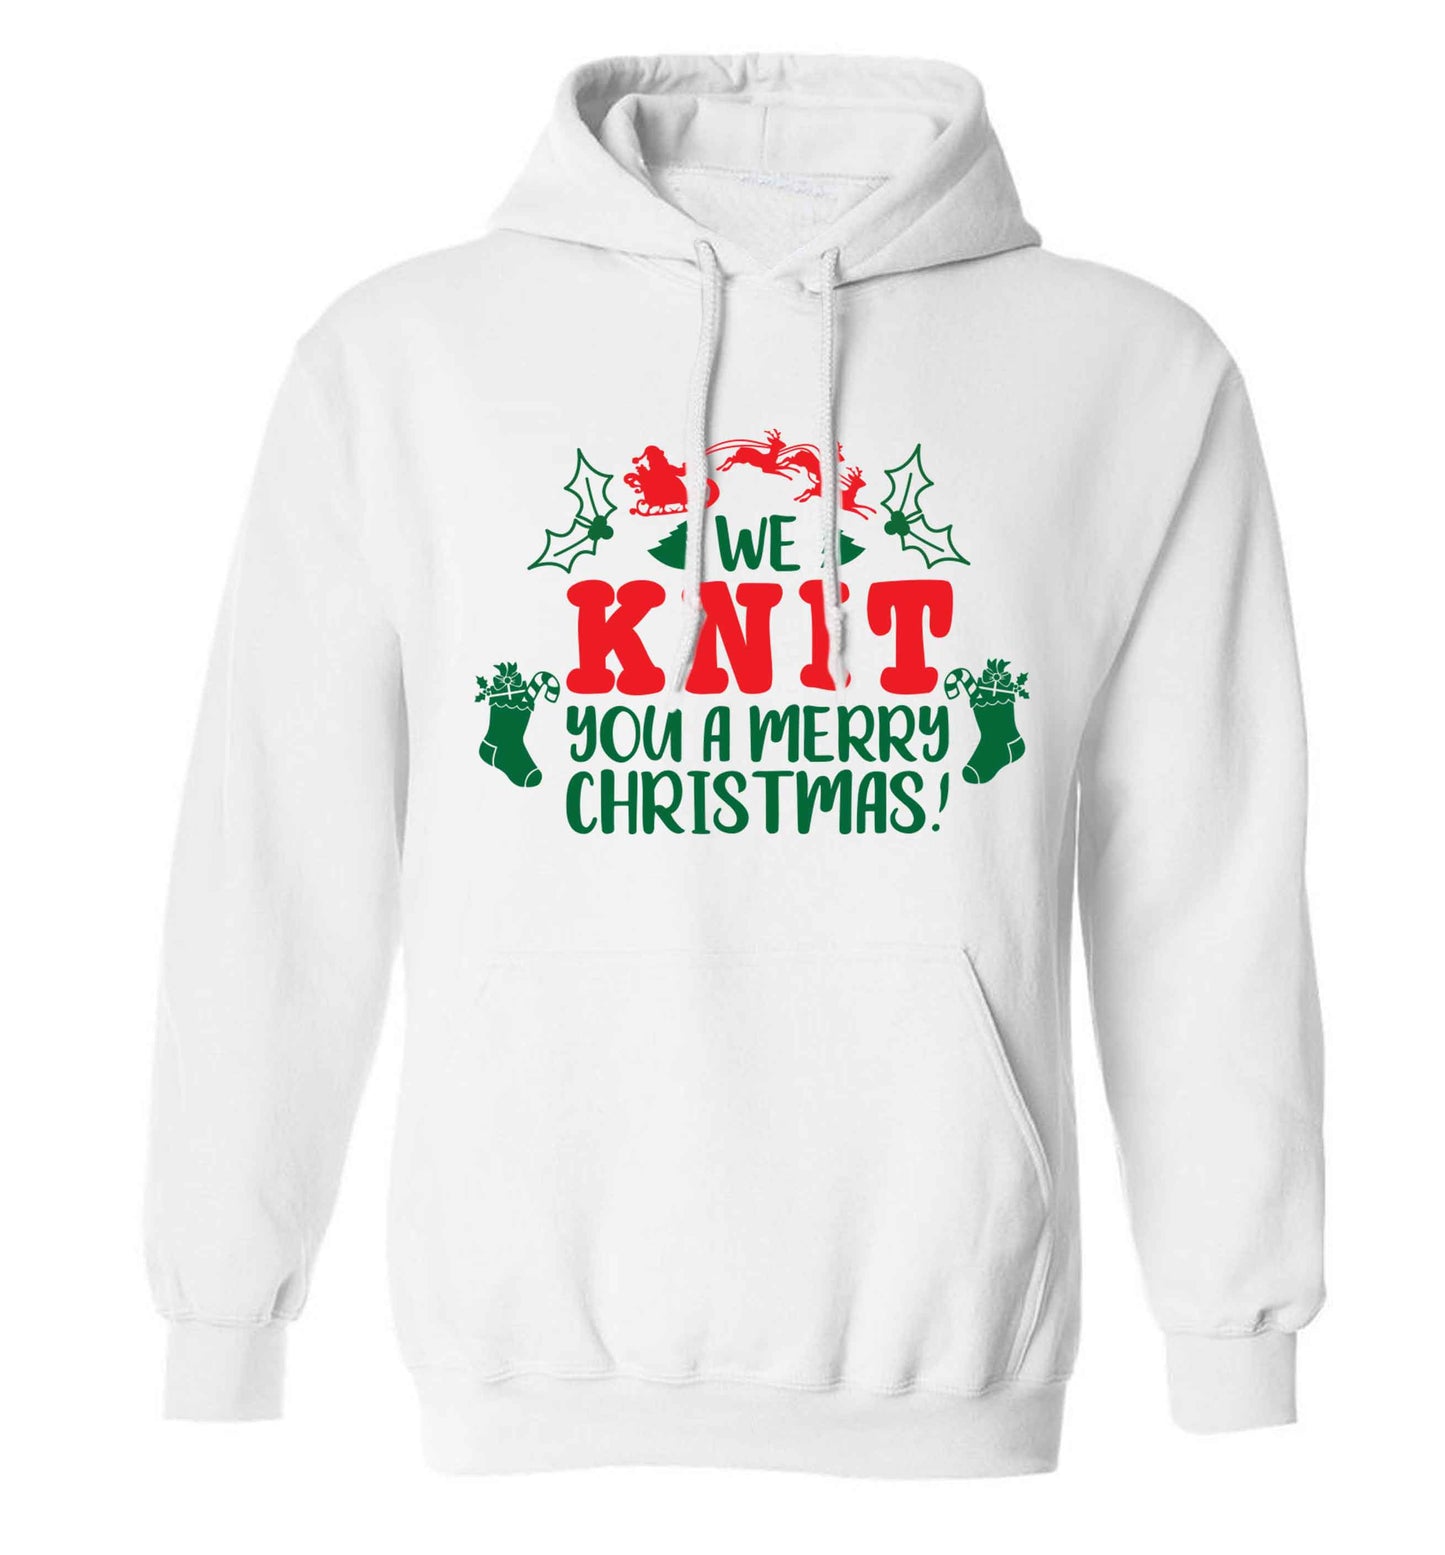 We knit you a merry Christmas adults unisex white hoodie 2XL